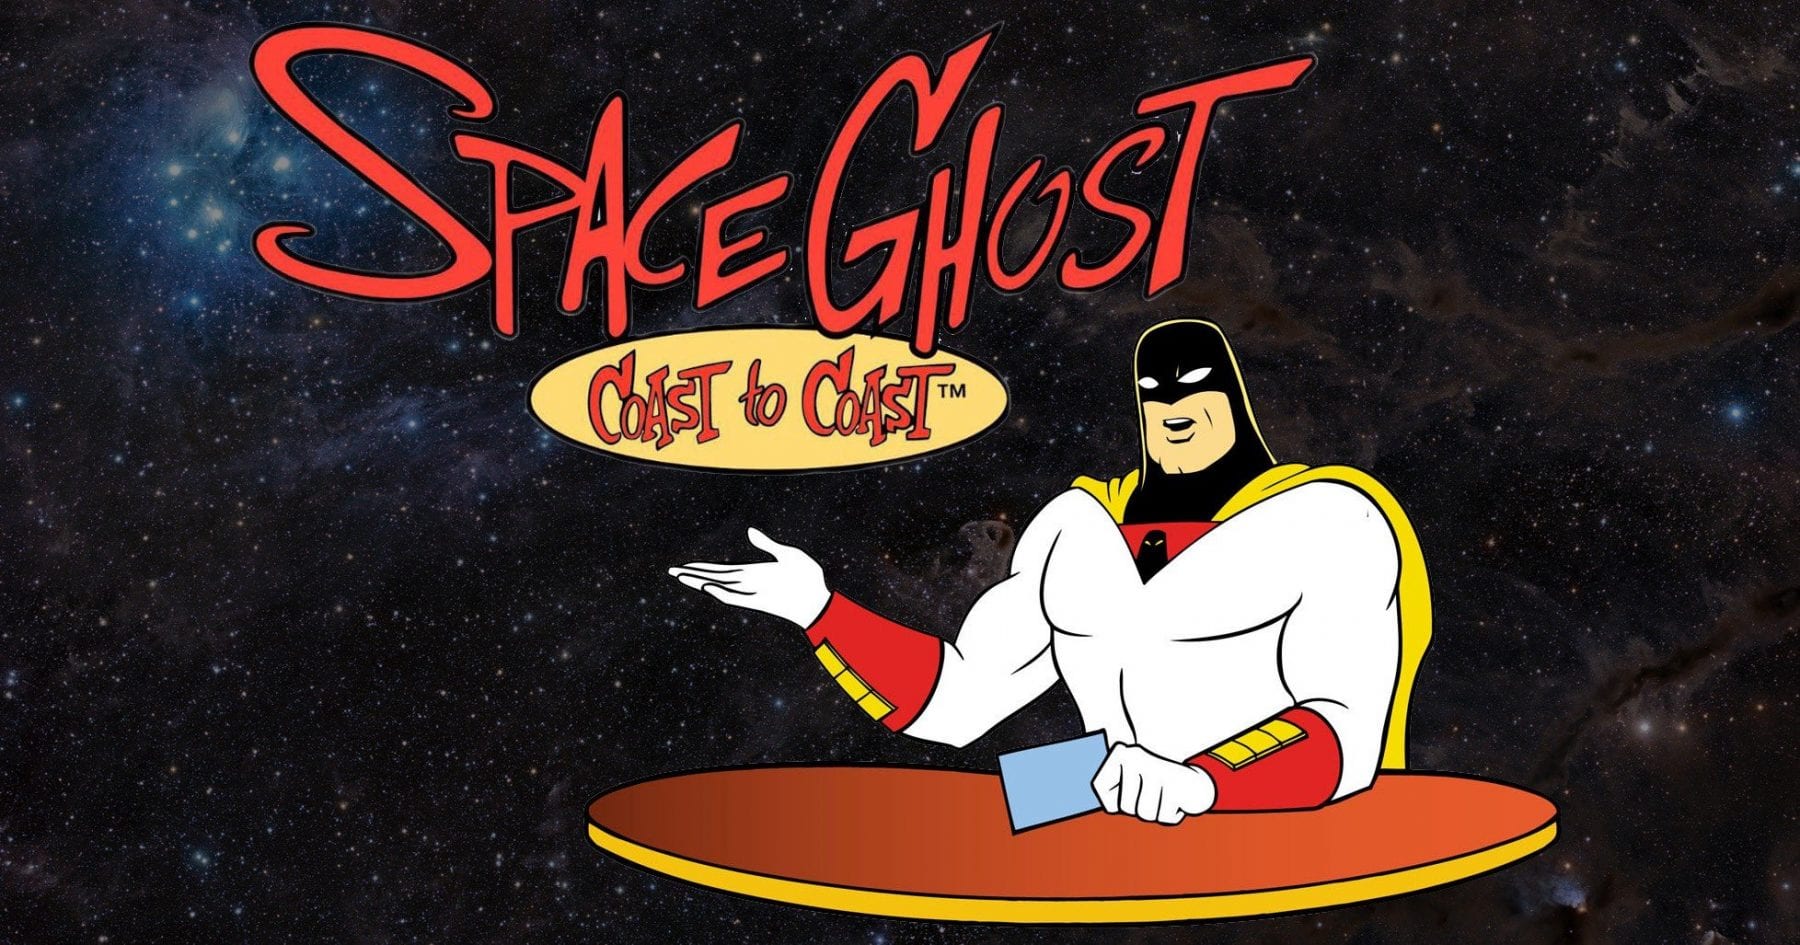 the unlikeliest cartoon talk show host debuted in April 1994 with Space Ghost Coast to Coast.